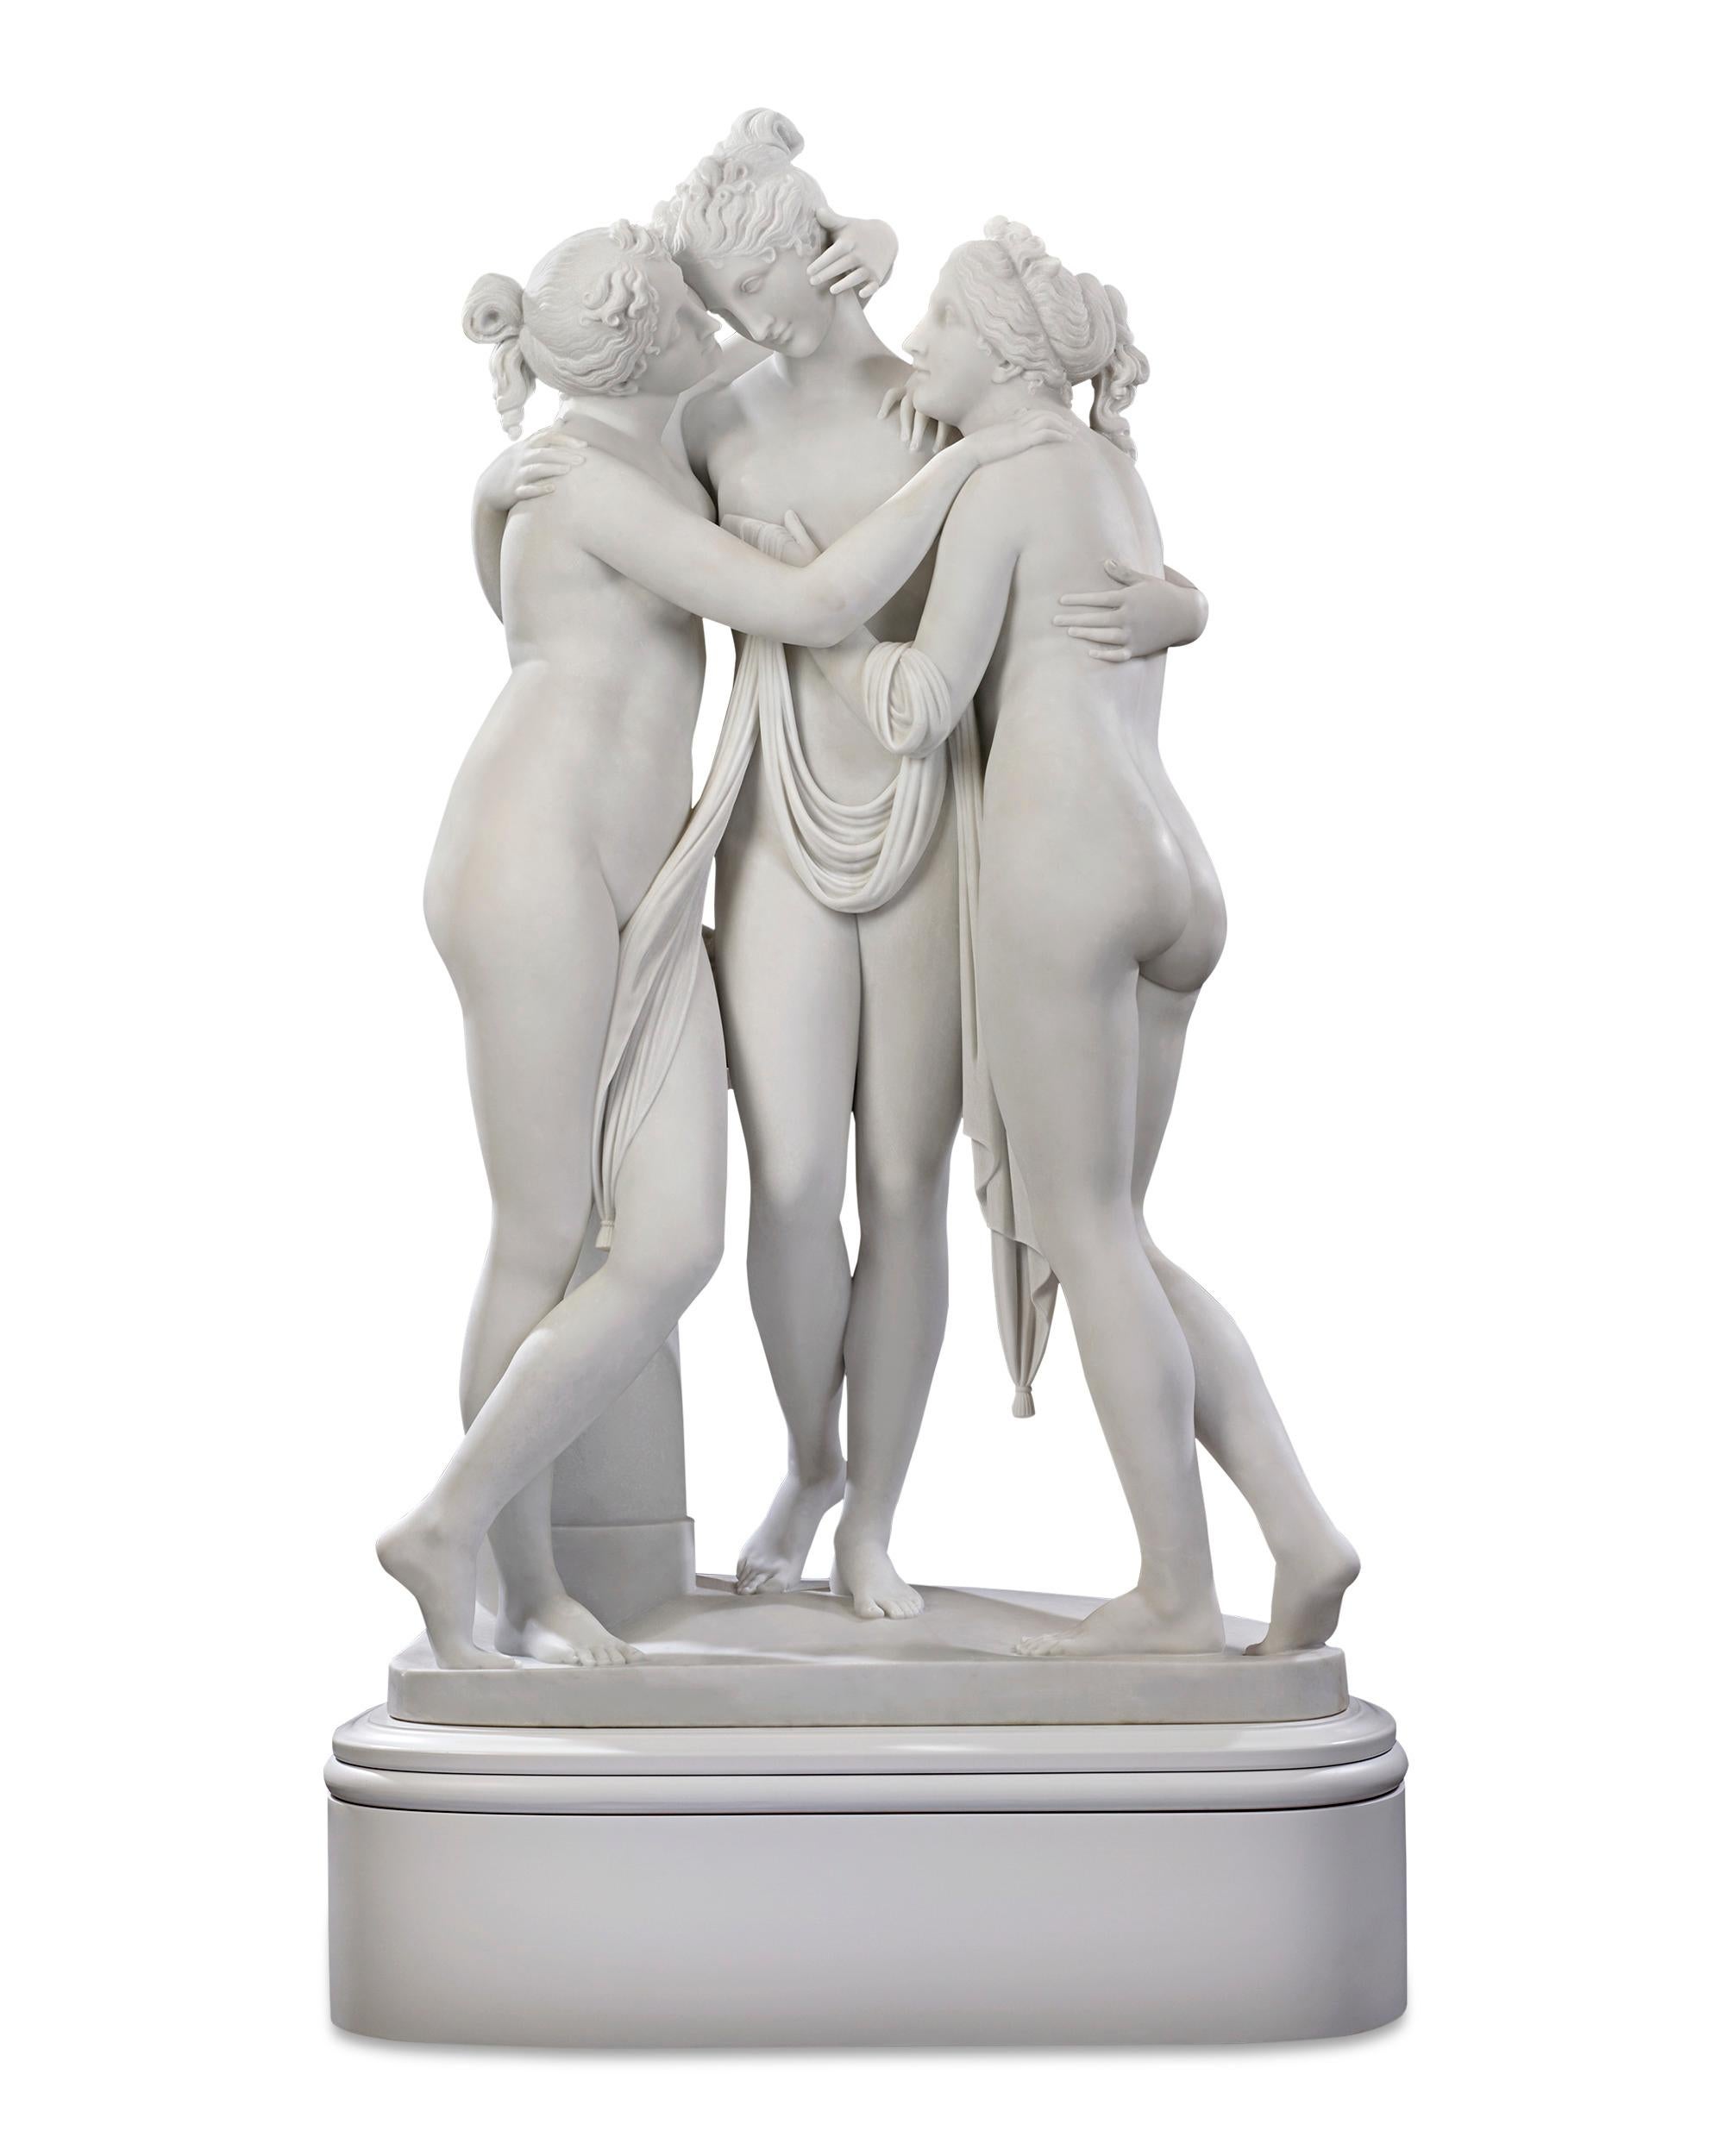 Antonio Frilli
1860-1902  Italian

The Three Graces

Signed “A. Frilli C / Firenze (Italia)” (on base)
Marble

Three nude women stand in an intimate embrace, their shapely bodies and serene expressions perfectly complemented by lustrous white marble